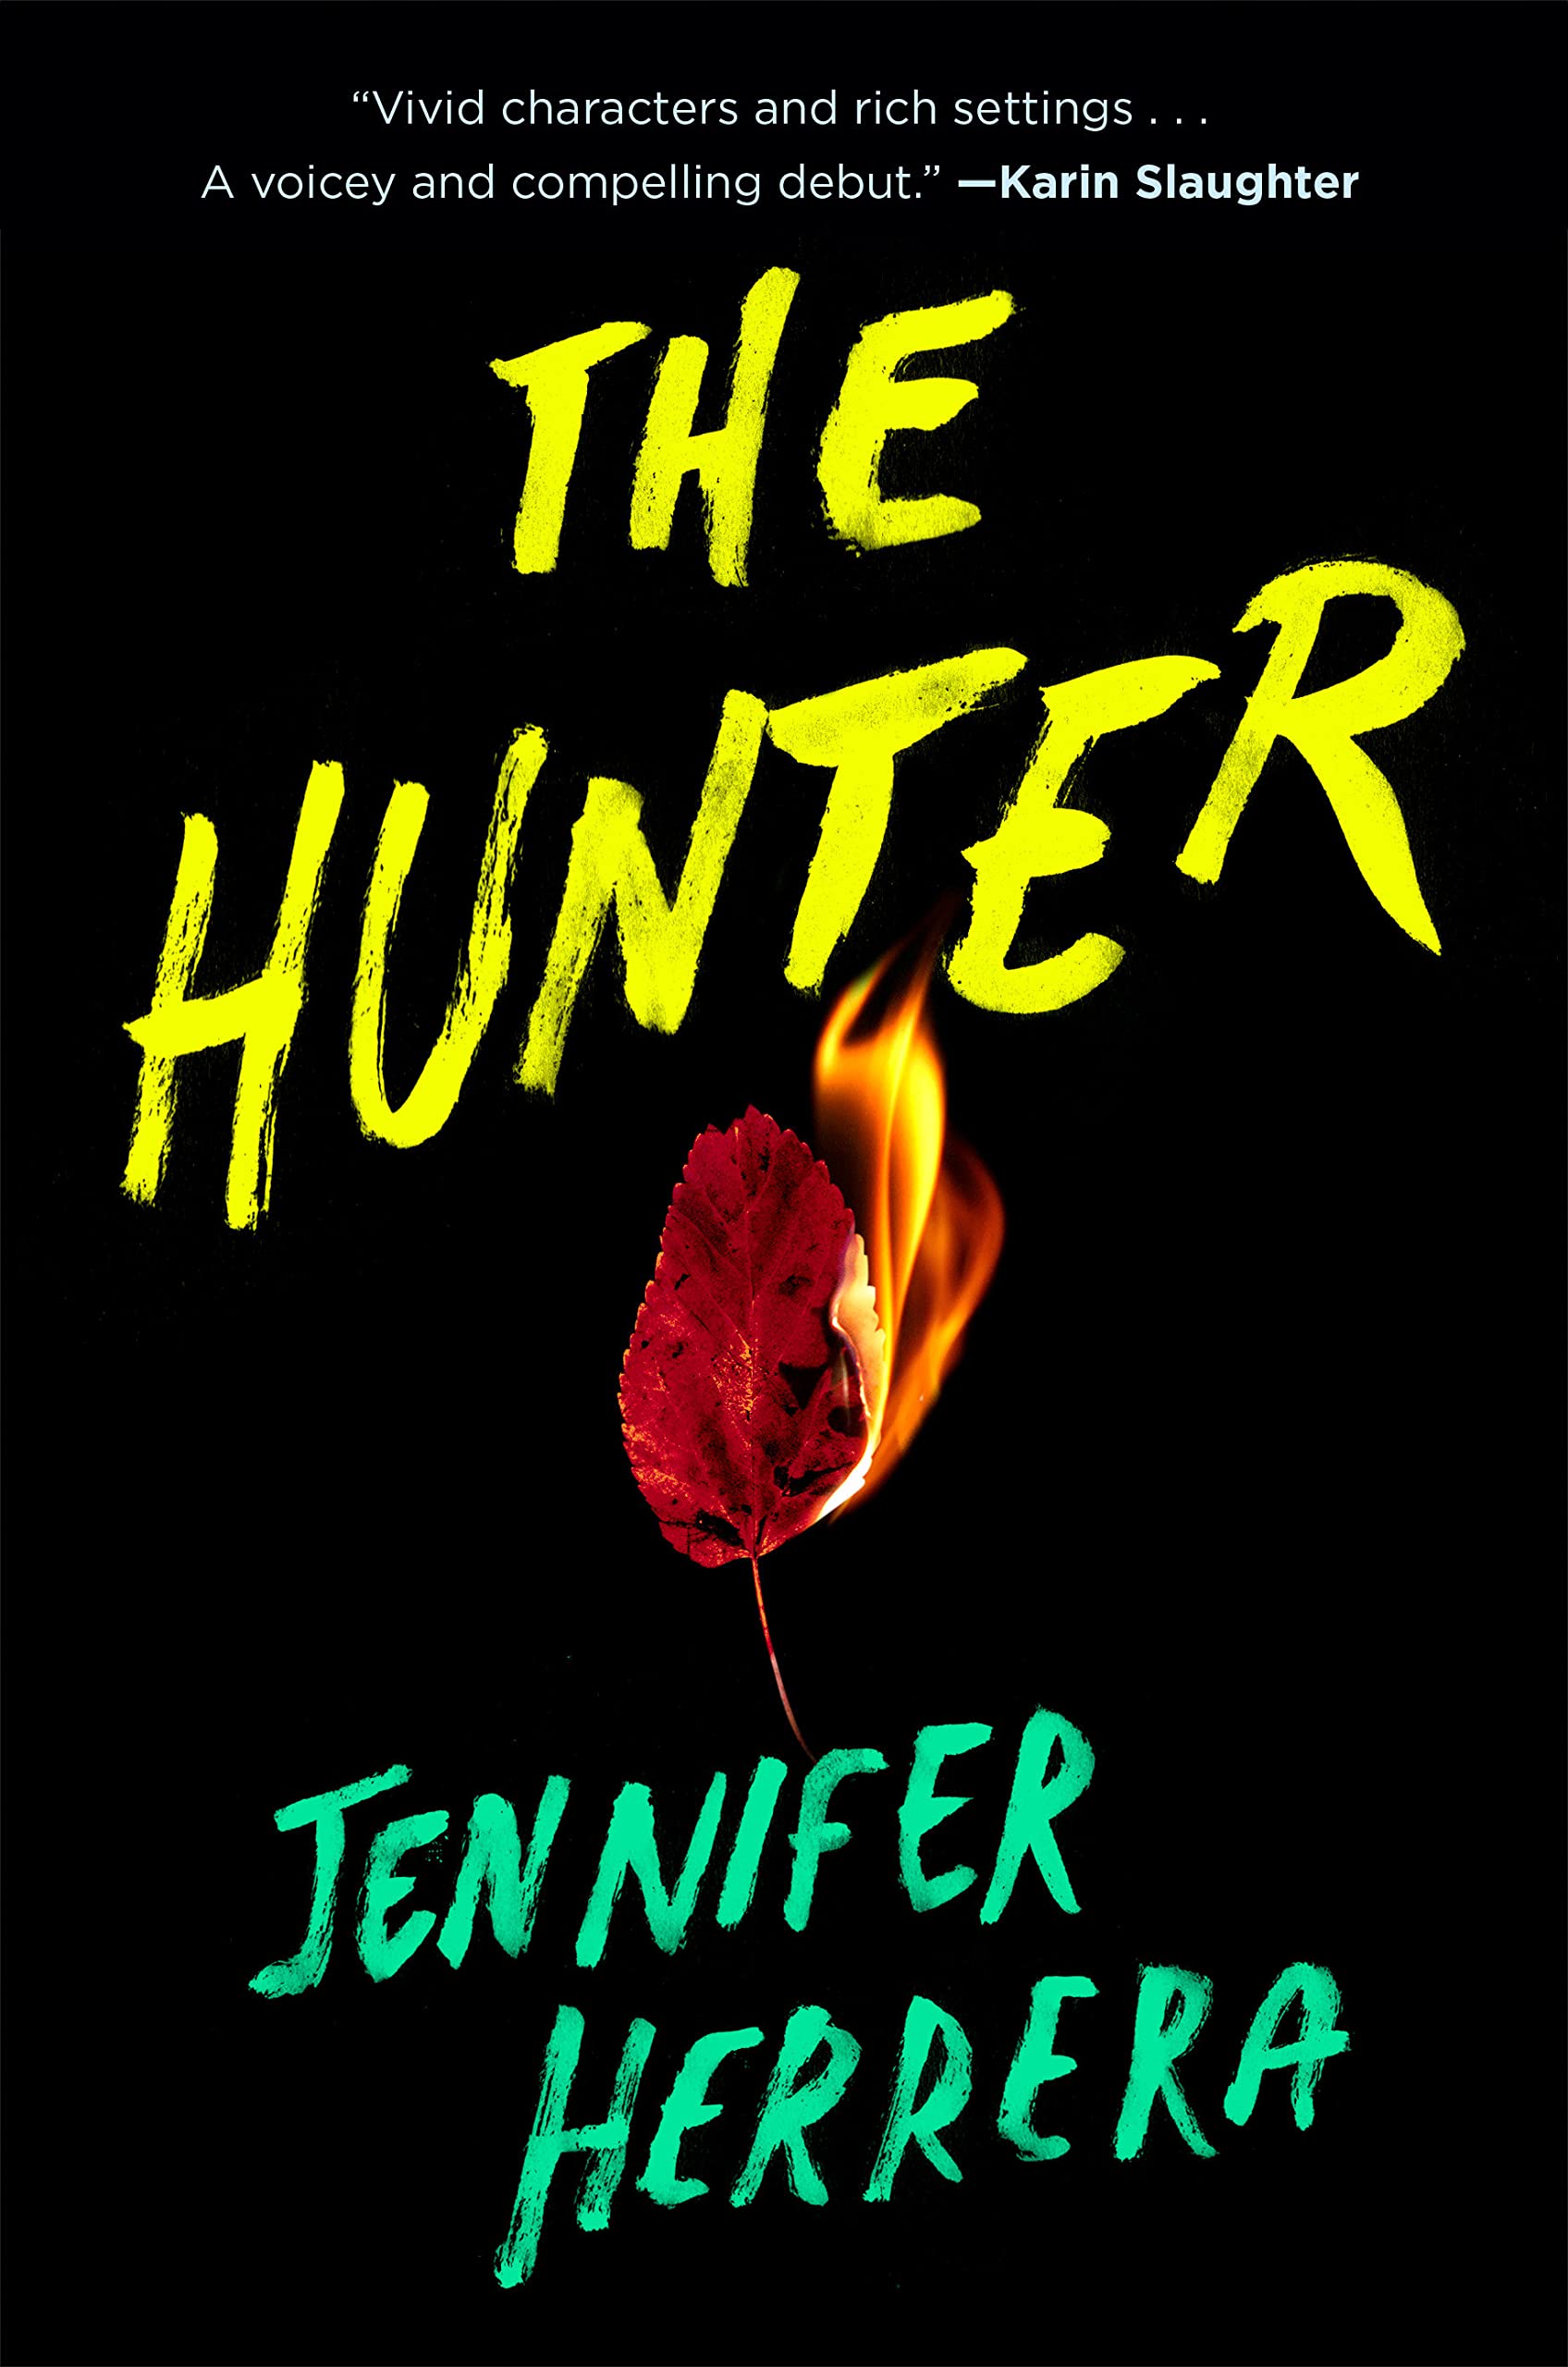 Image for "The Hunter"